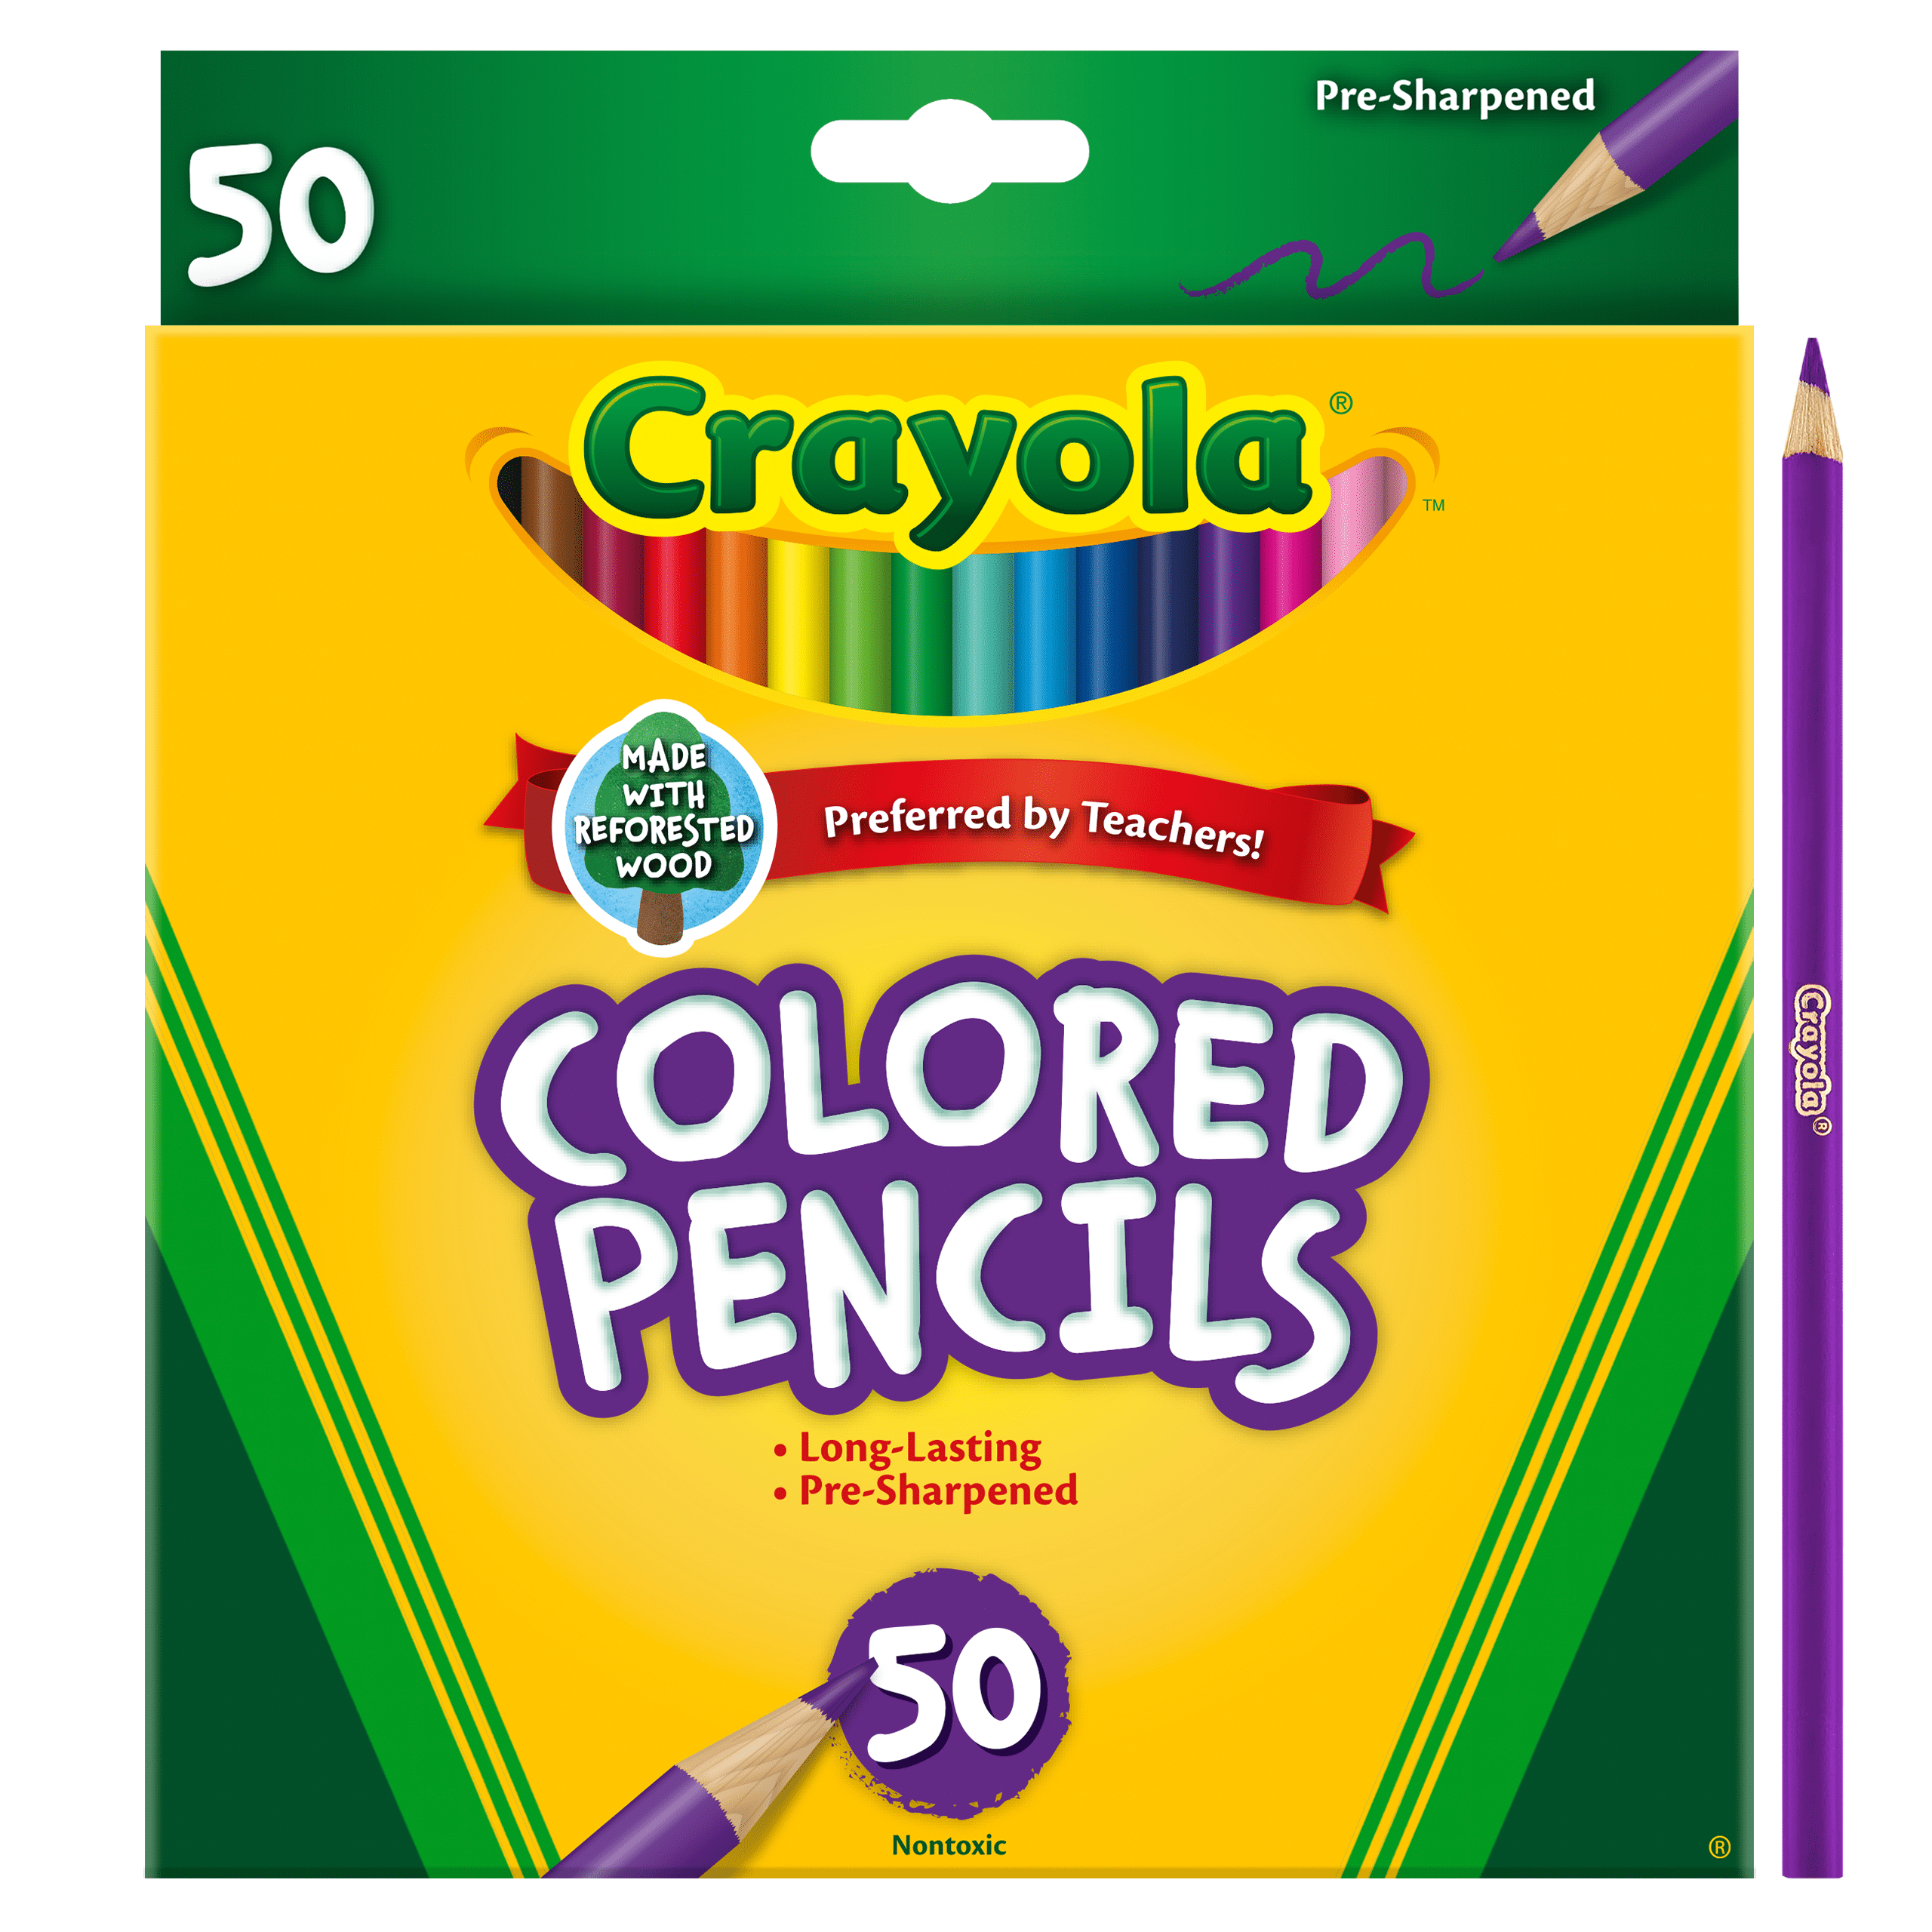 Crayola Colored Pencil Set, Assorted Colors, 50 Count, School Supplies, Beginner Child